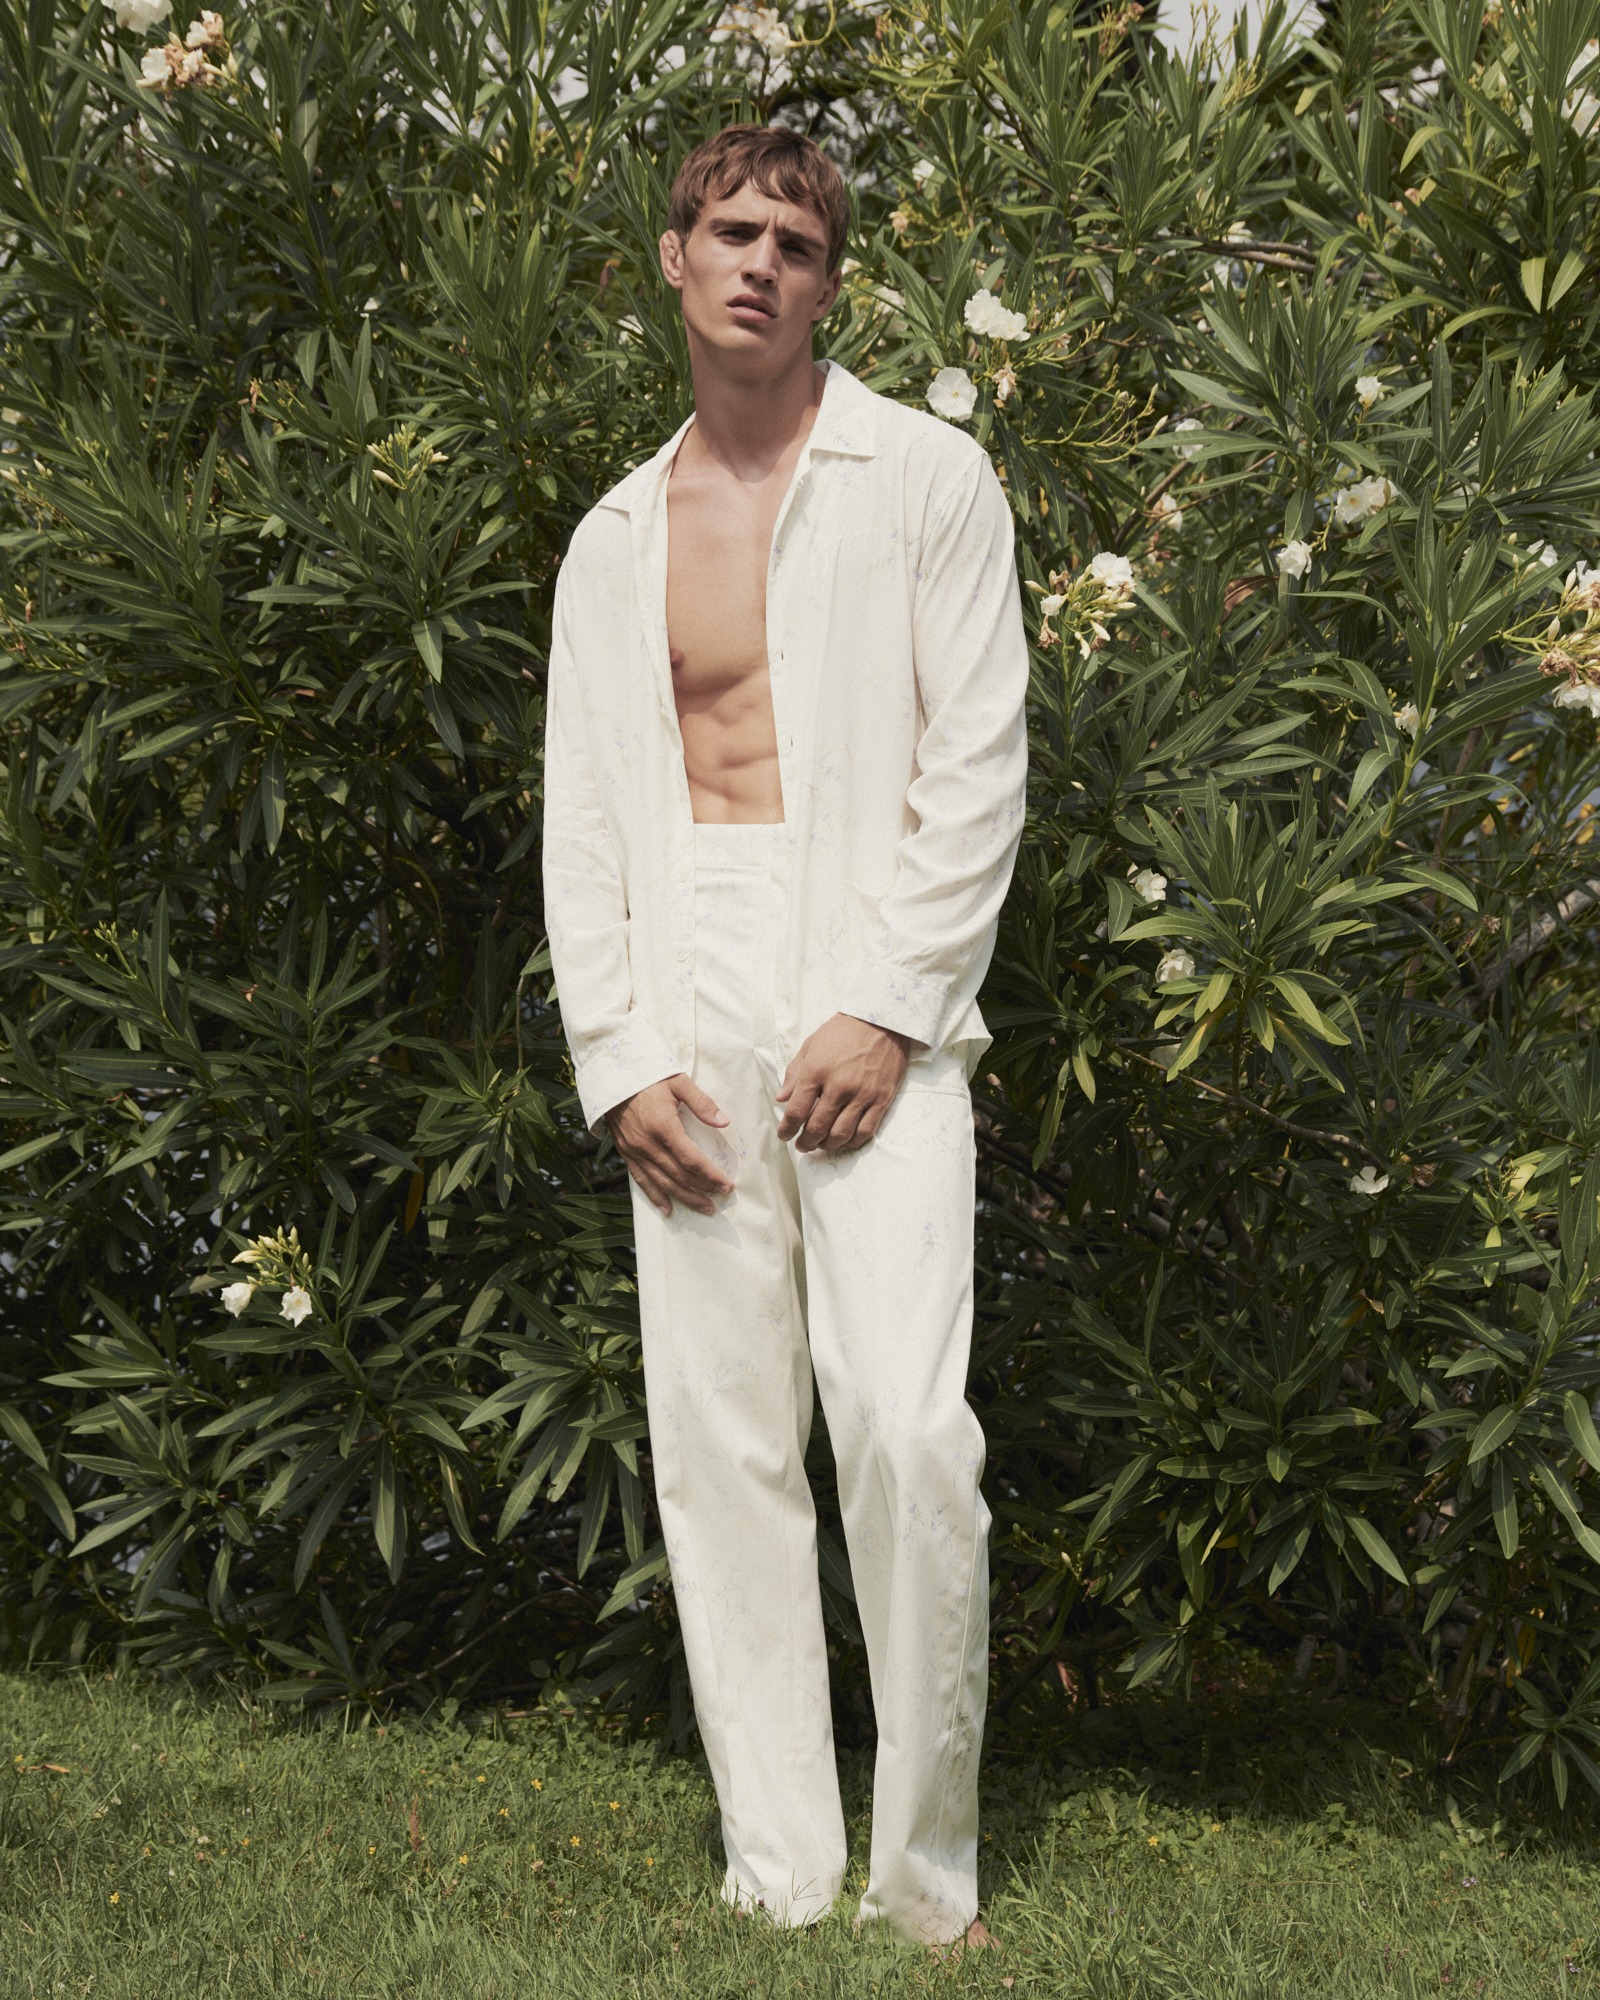 Essential Homme Magazine 10 by Andreas ORTNER